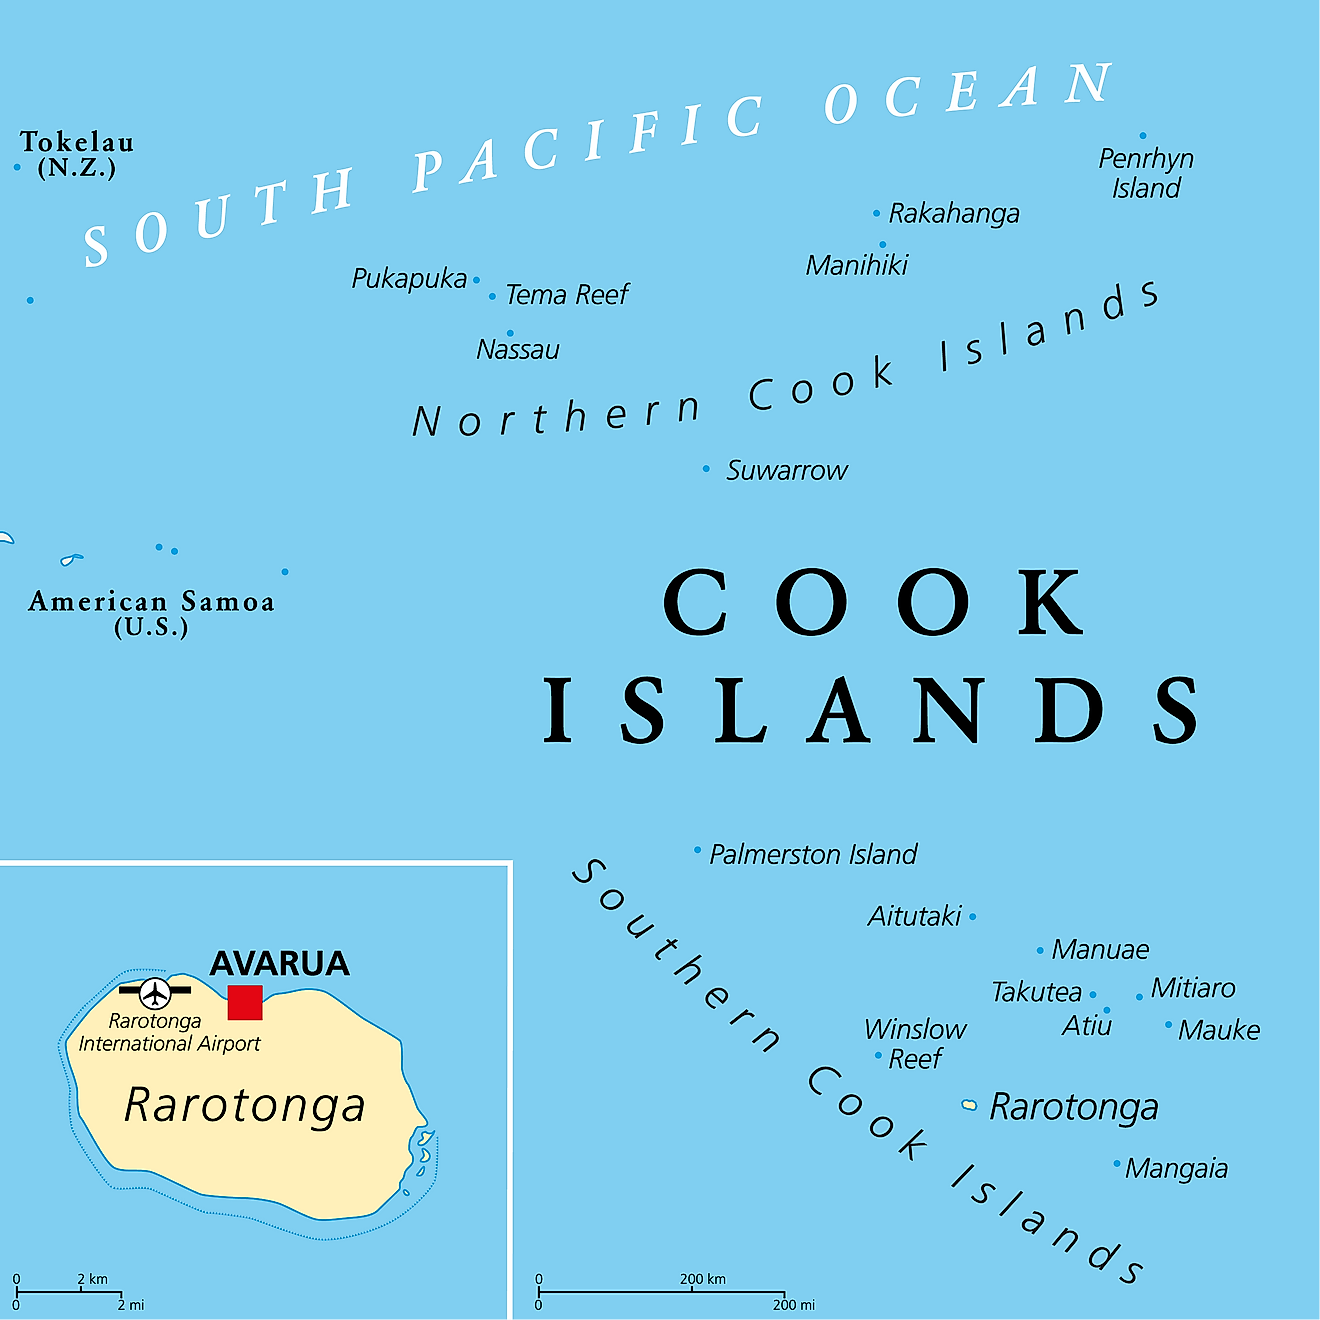 Political Map of Cook Islands showing its capital city - Avarua